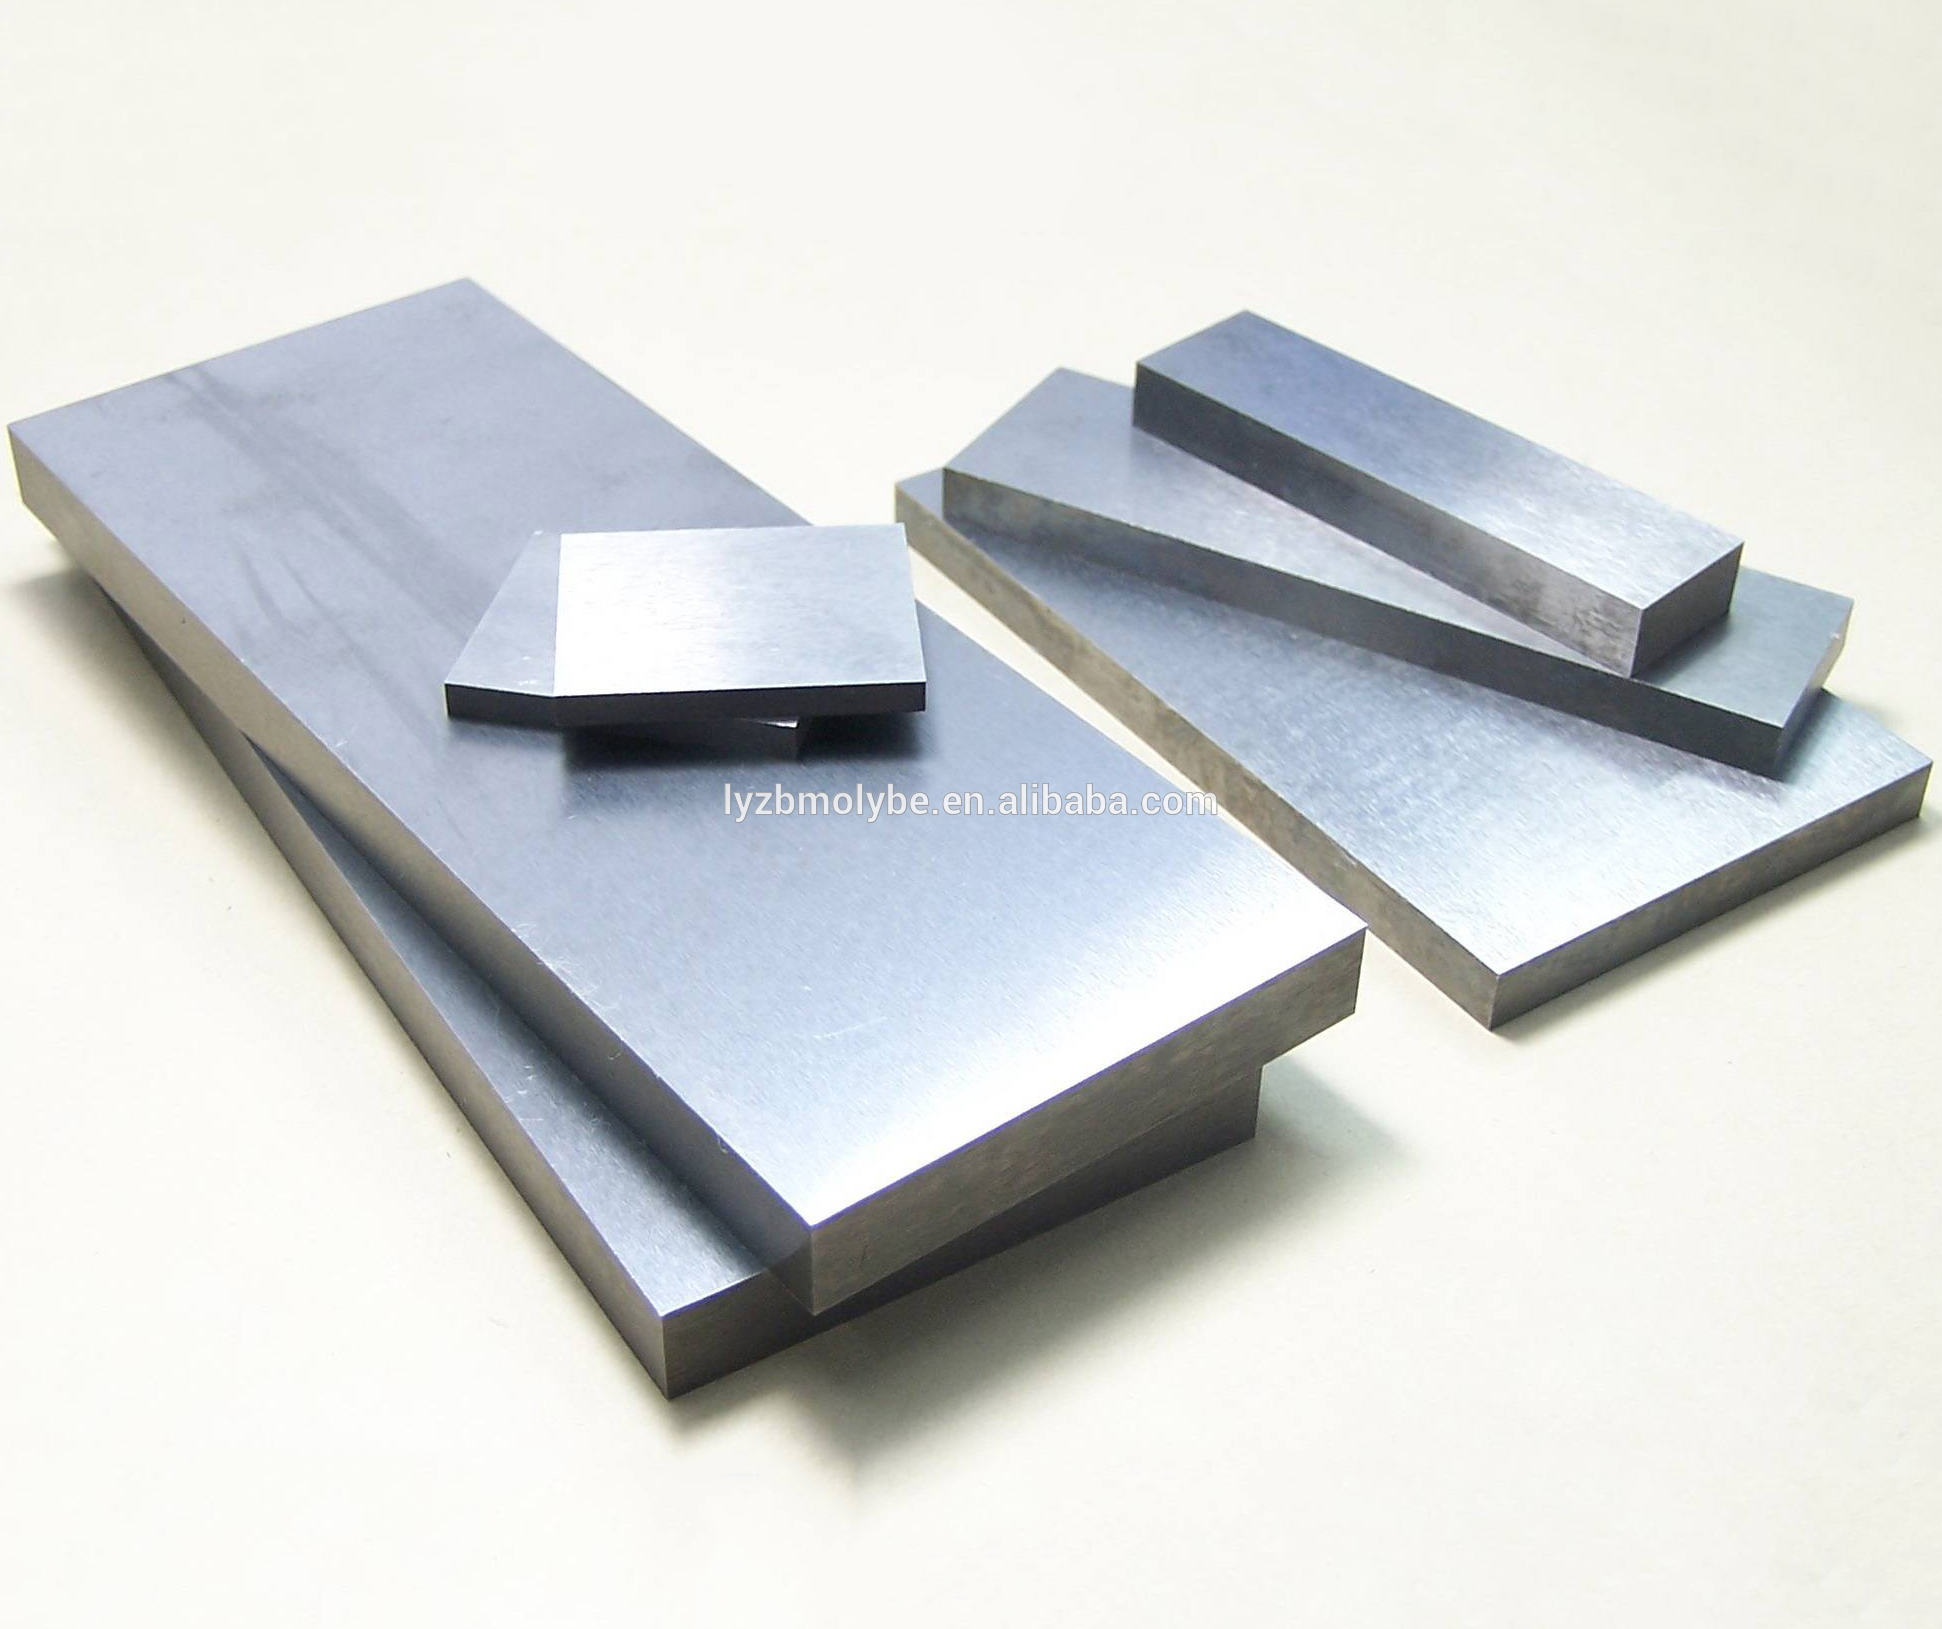 Luoyang factory direct supply Mo 99.95% Molybdenum plate